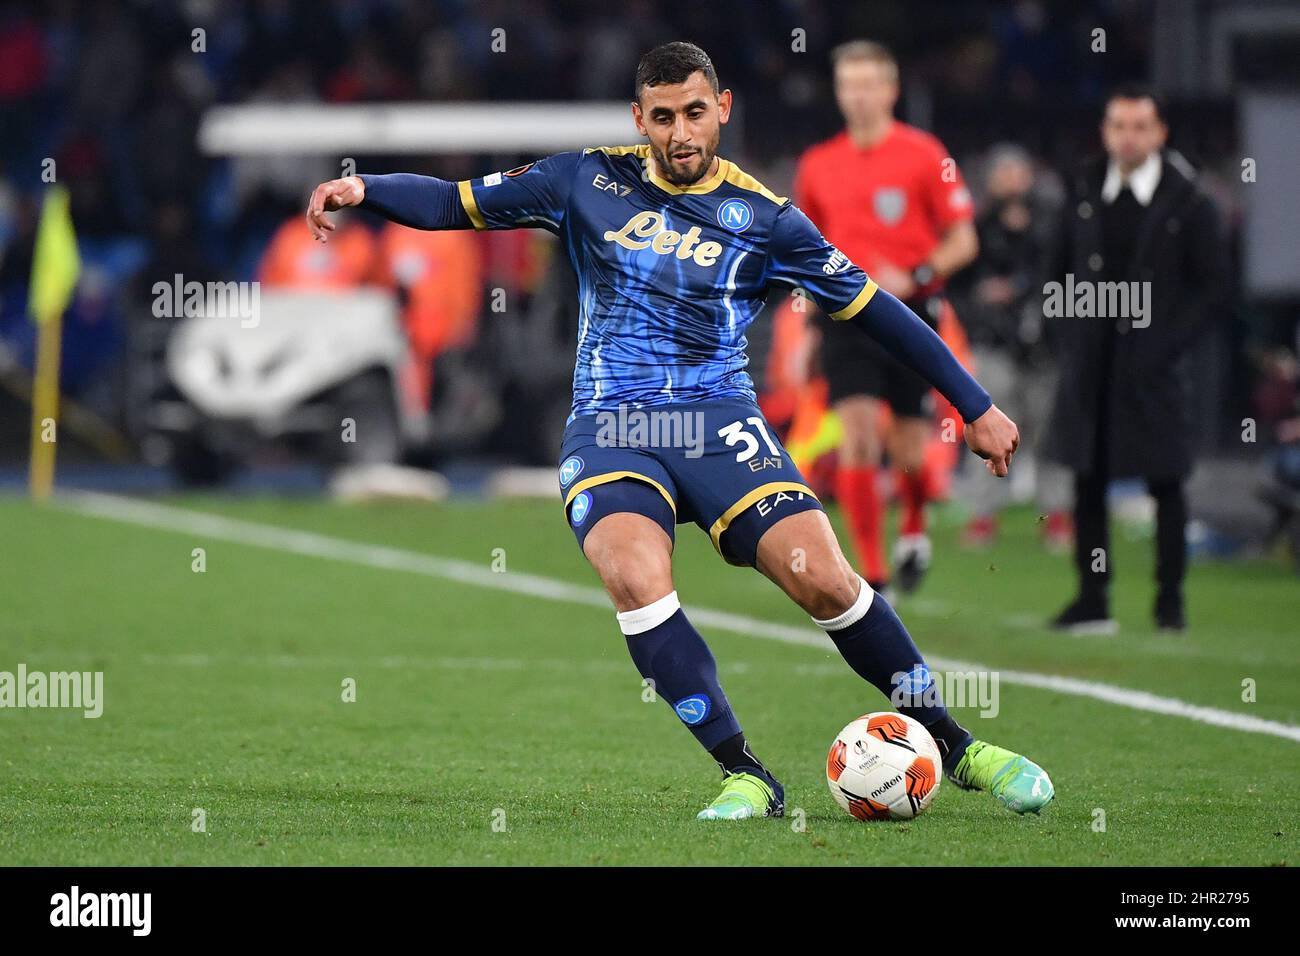 Naples, Italy. 24th Feb, 2022. Napoli's defender Faouzi Ghoulam in action during SSC Napoli vs FC Barcellona, football Europa League match in Naples, Italy, February 24 2022 Credit: Independent Photo Agency/Alamy Live News Stock Photo